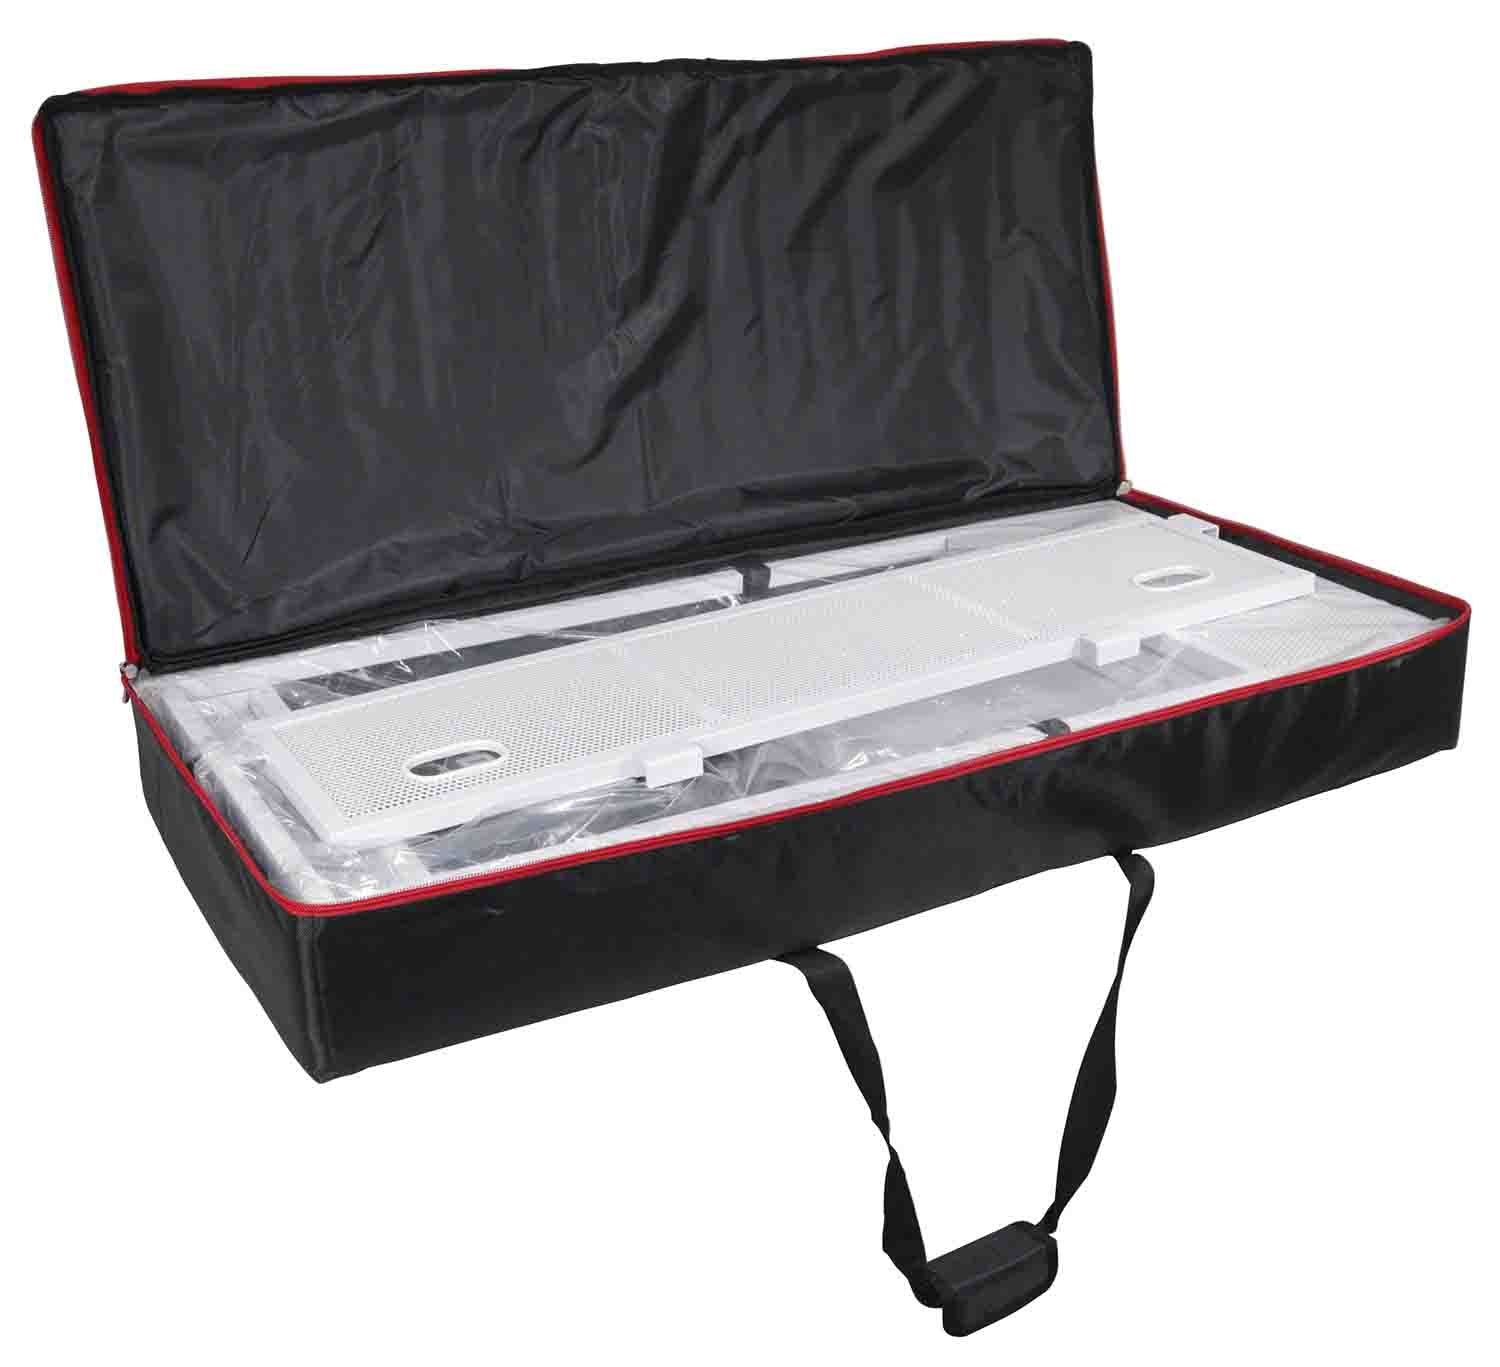 ProX XF-VISTA WH MK2 DJ Booth Facade Table Station Frame with Scrim kit and Padded Travel Bag - White/ Black - Hollywood DJ